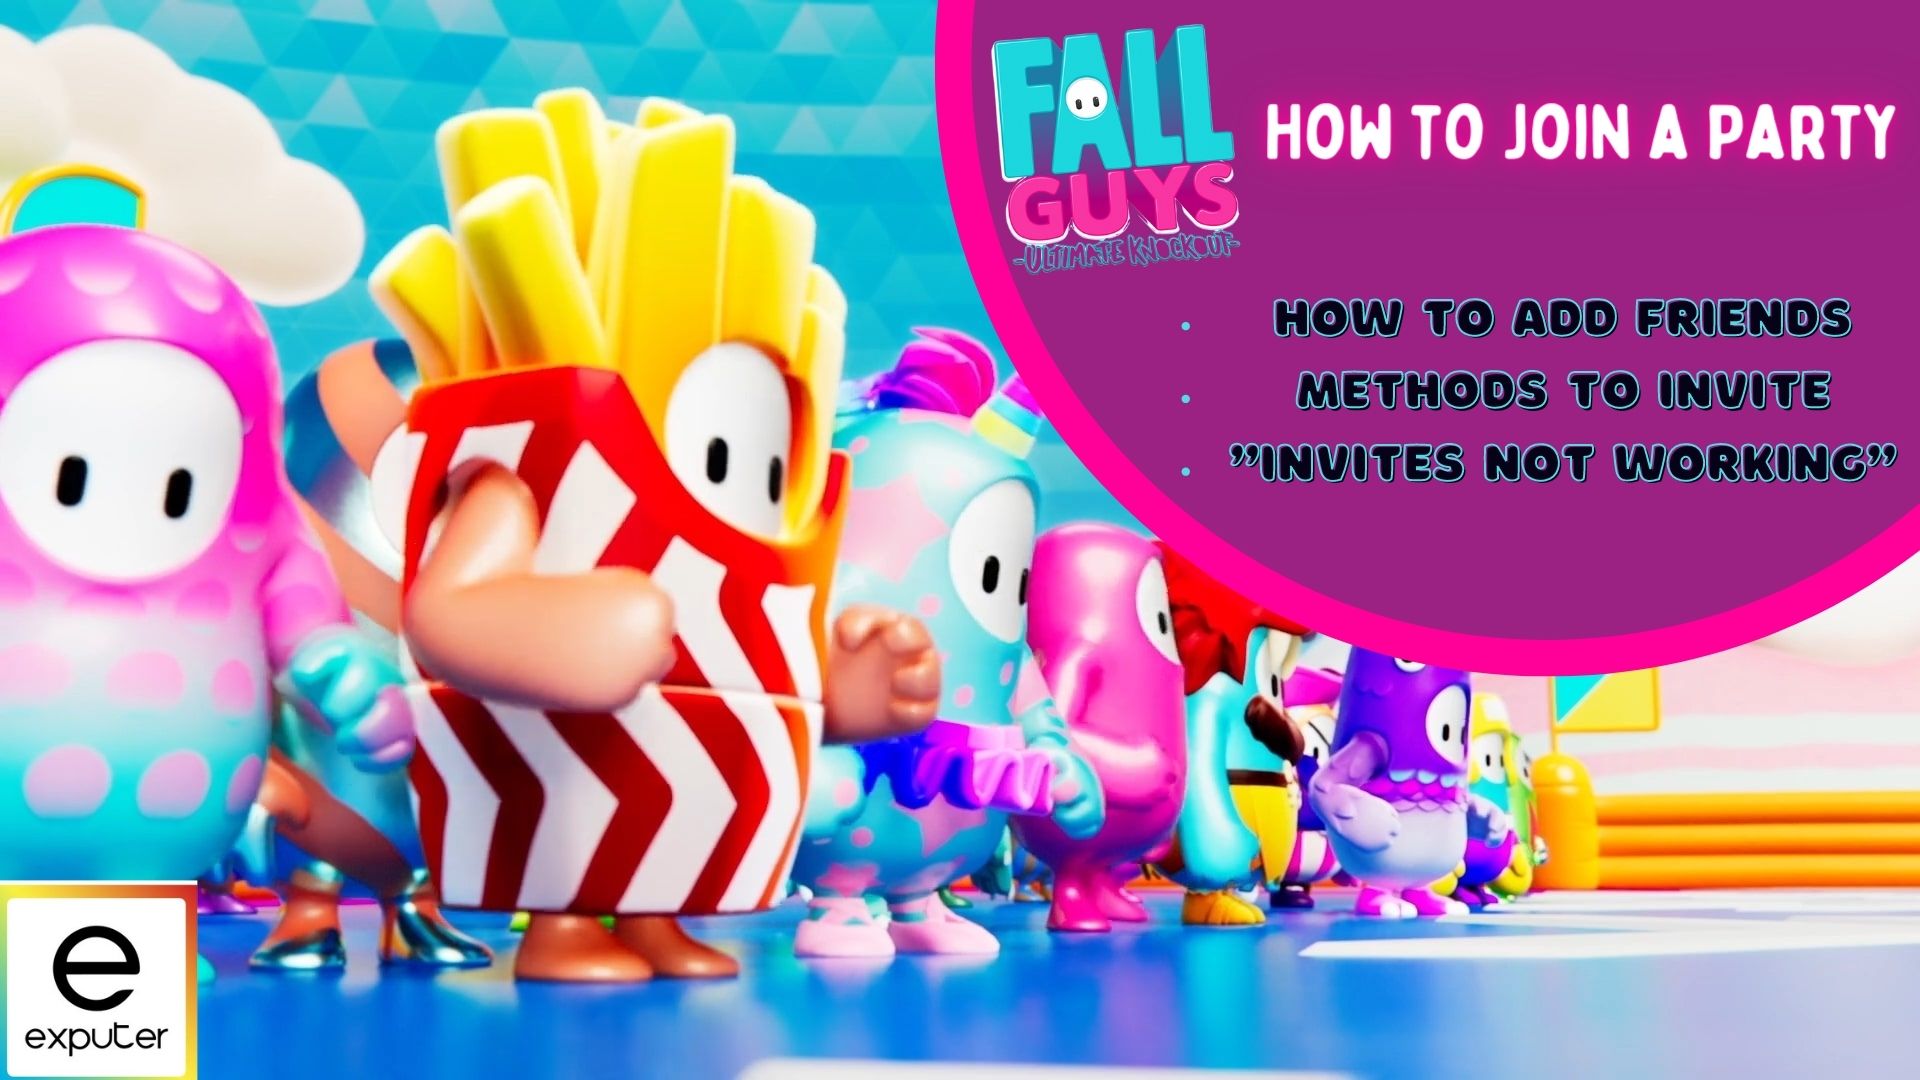 Fall Guys: How To Join a Party